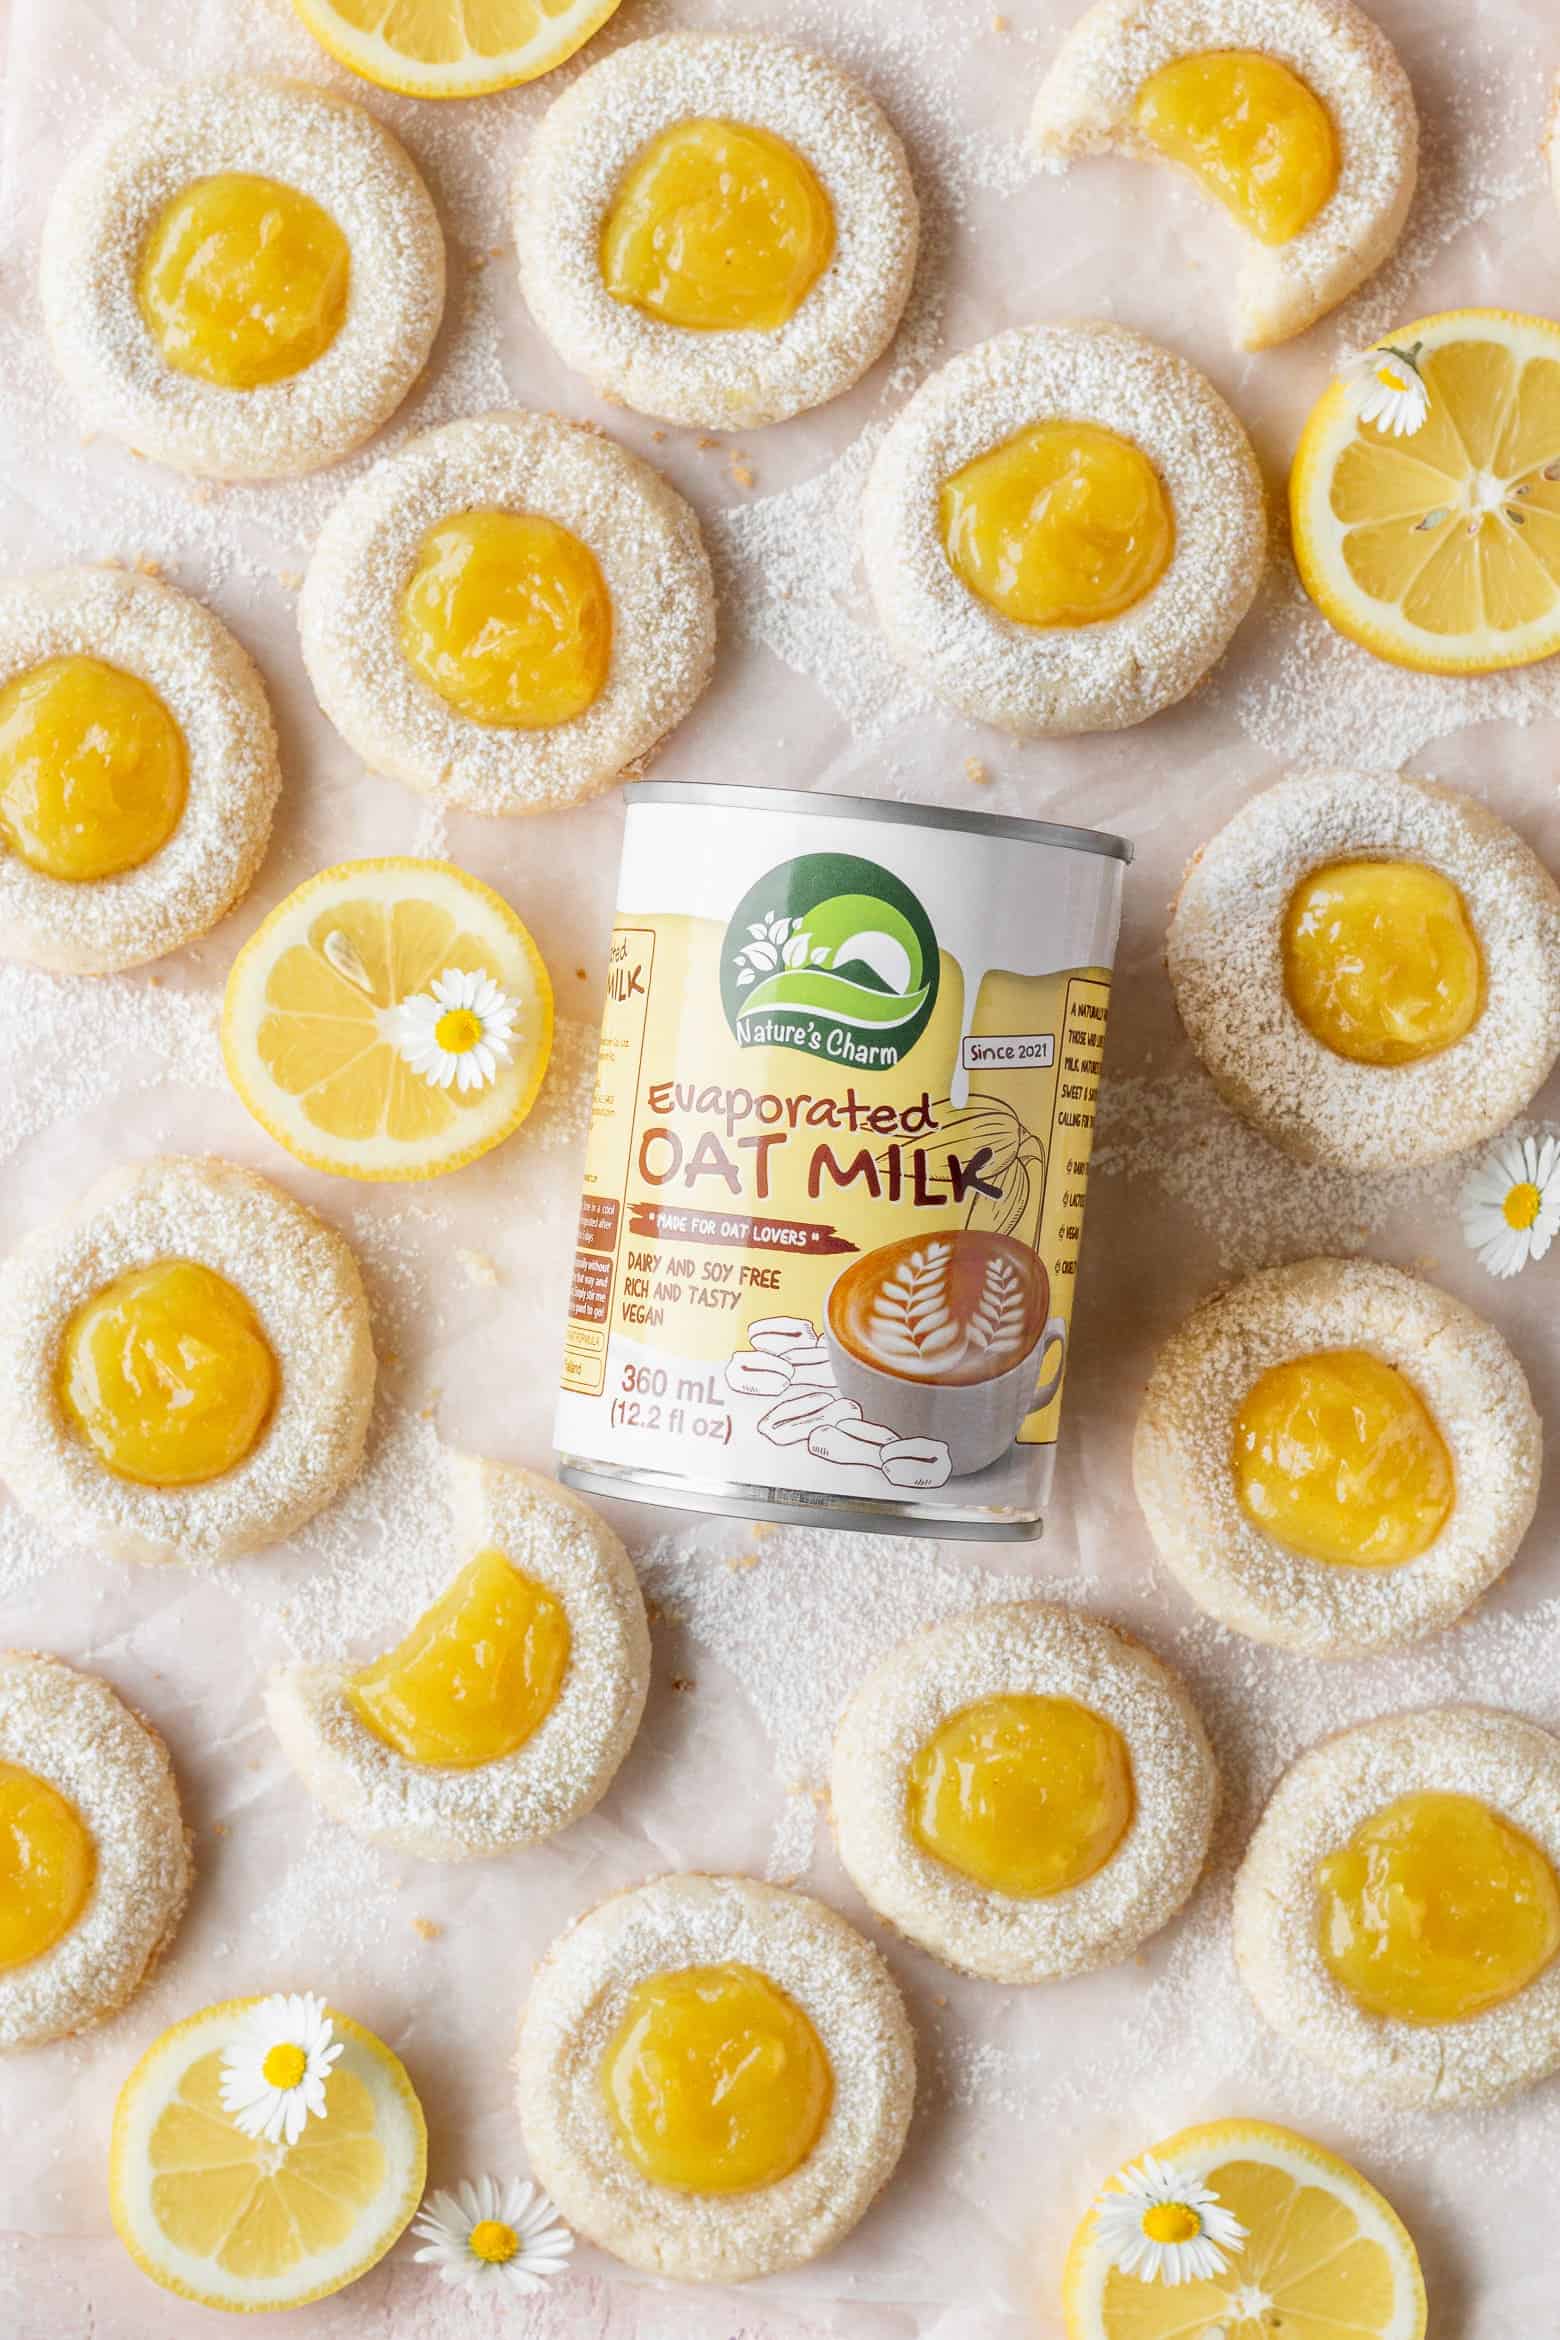 A can of evaporated oat milk with lemon cookies